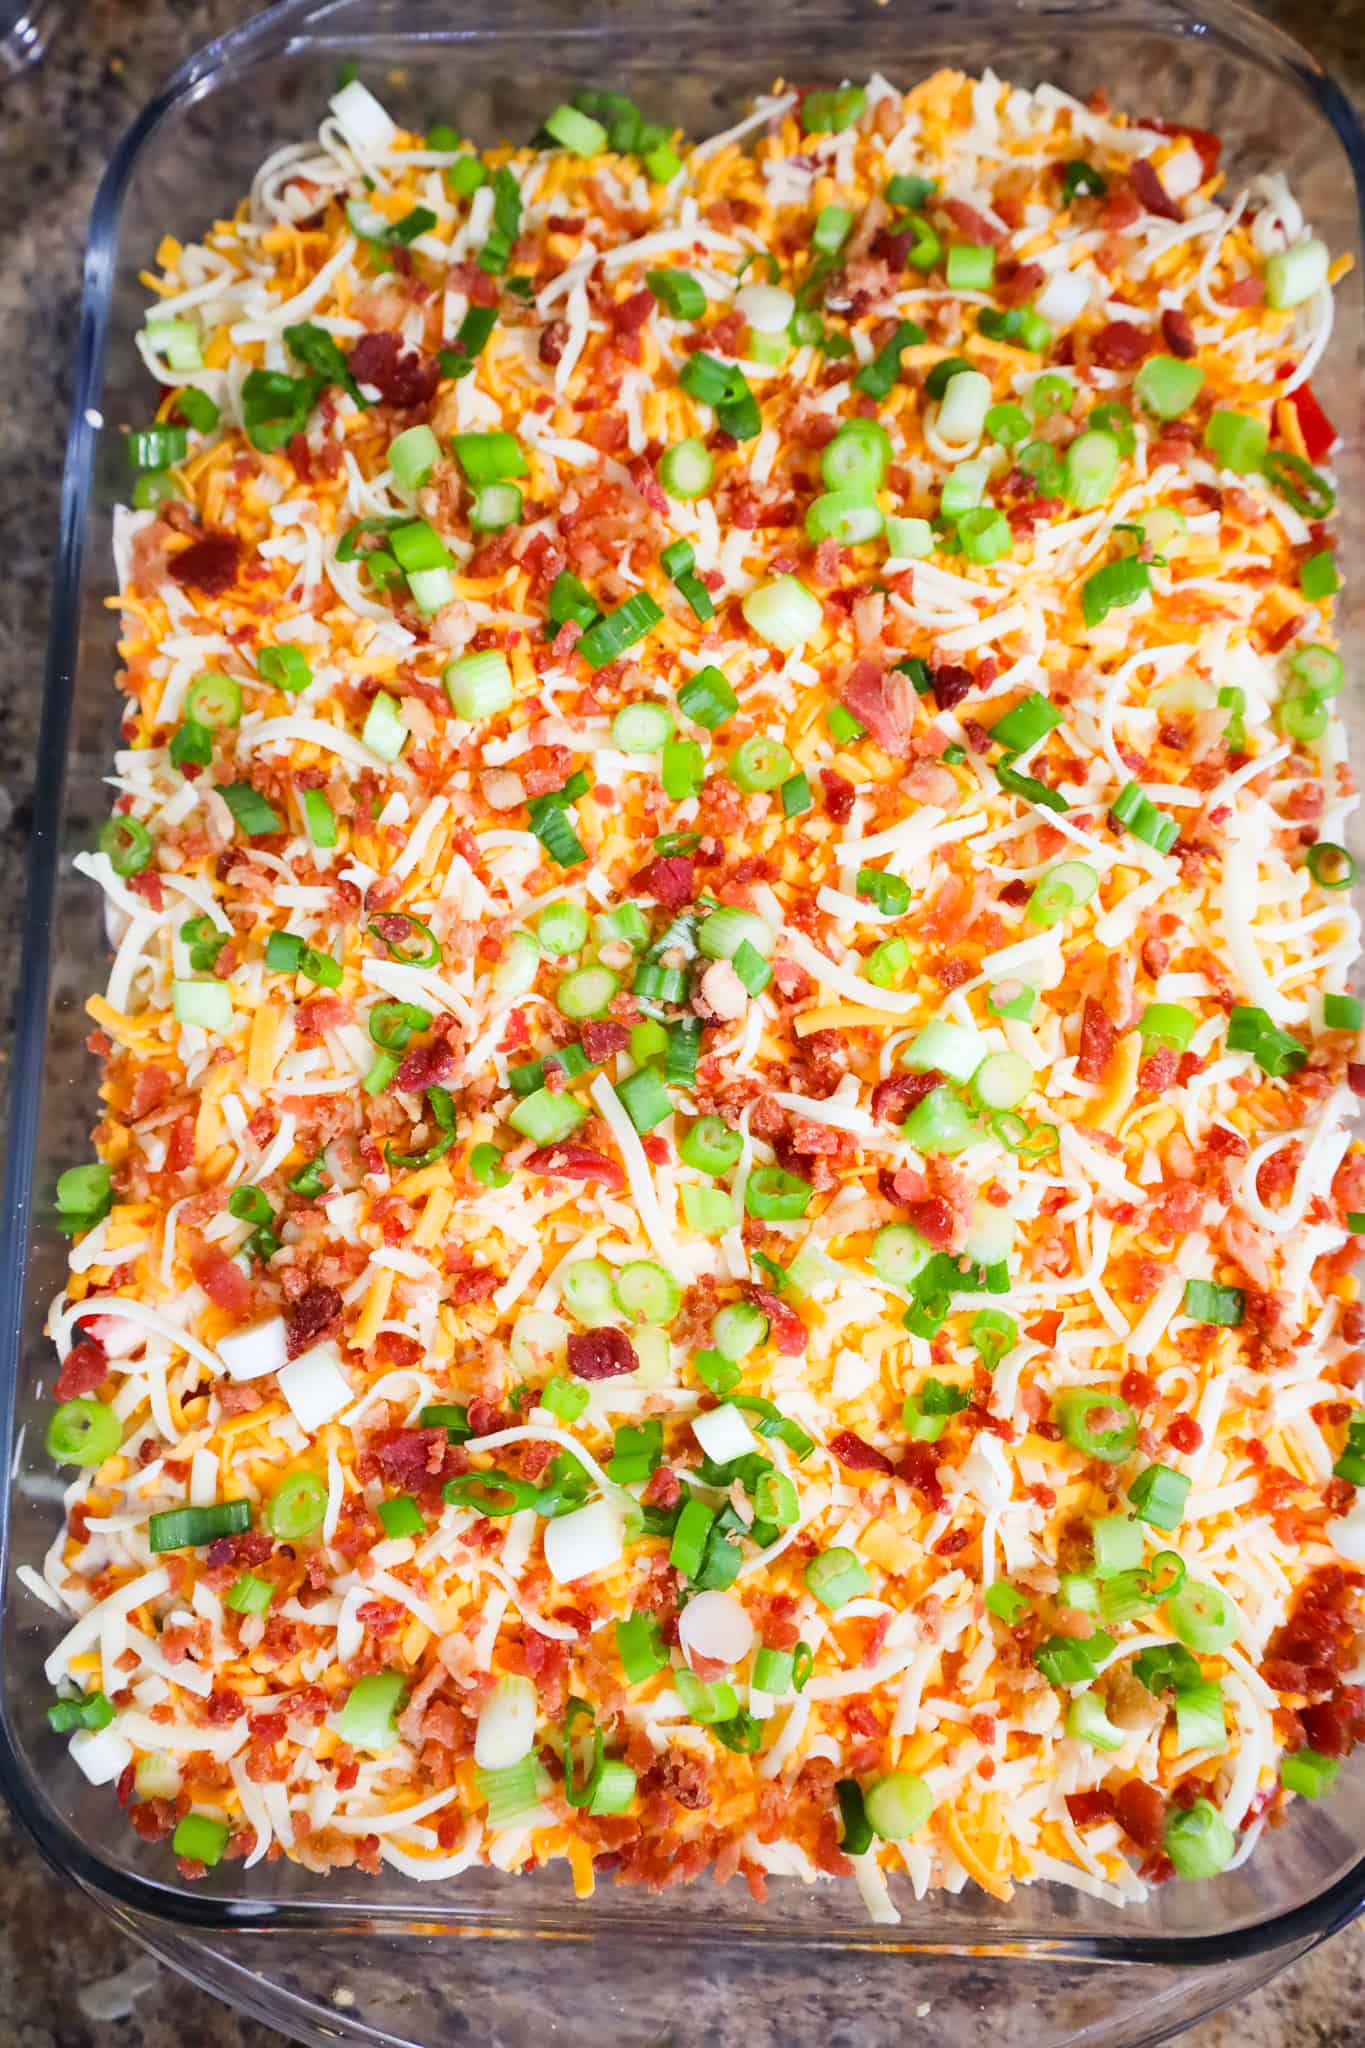 chopped green onions, crumbled bacon and shredded cheese on top of cornbread salad in a baking dish